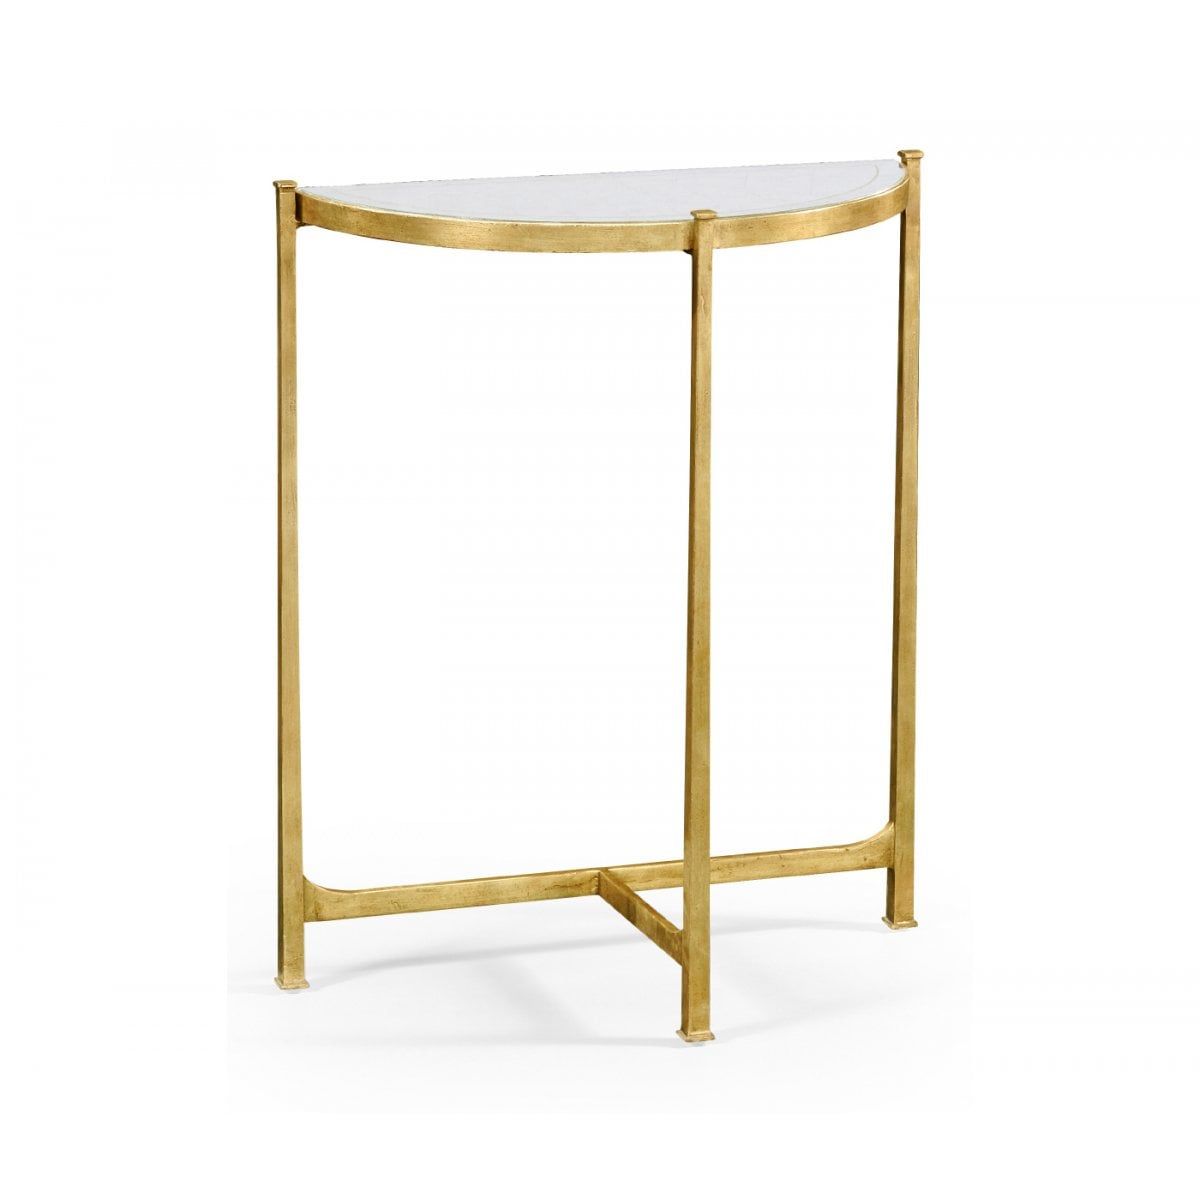 Luxury Designer Small Glass Gold Console Table | Swanky Intended For Glass And Gold Oval Console Tables (View 12 of 20)